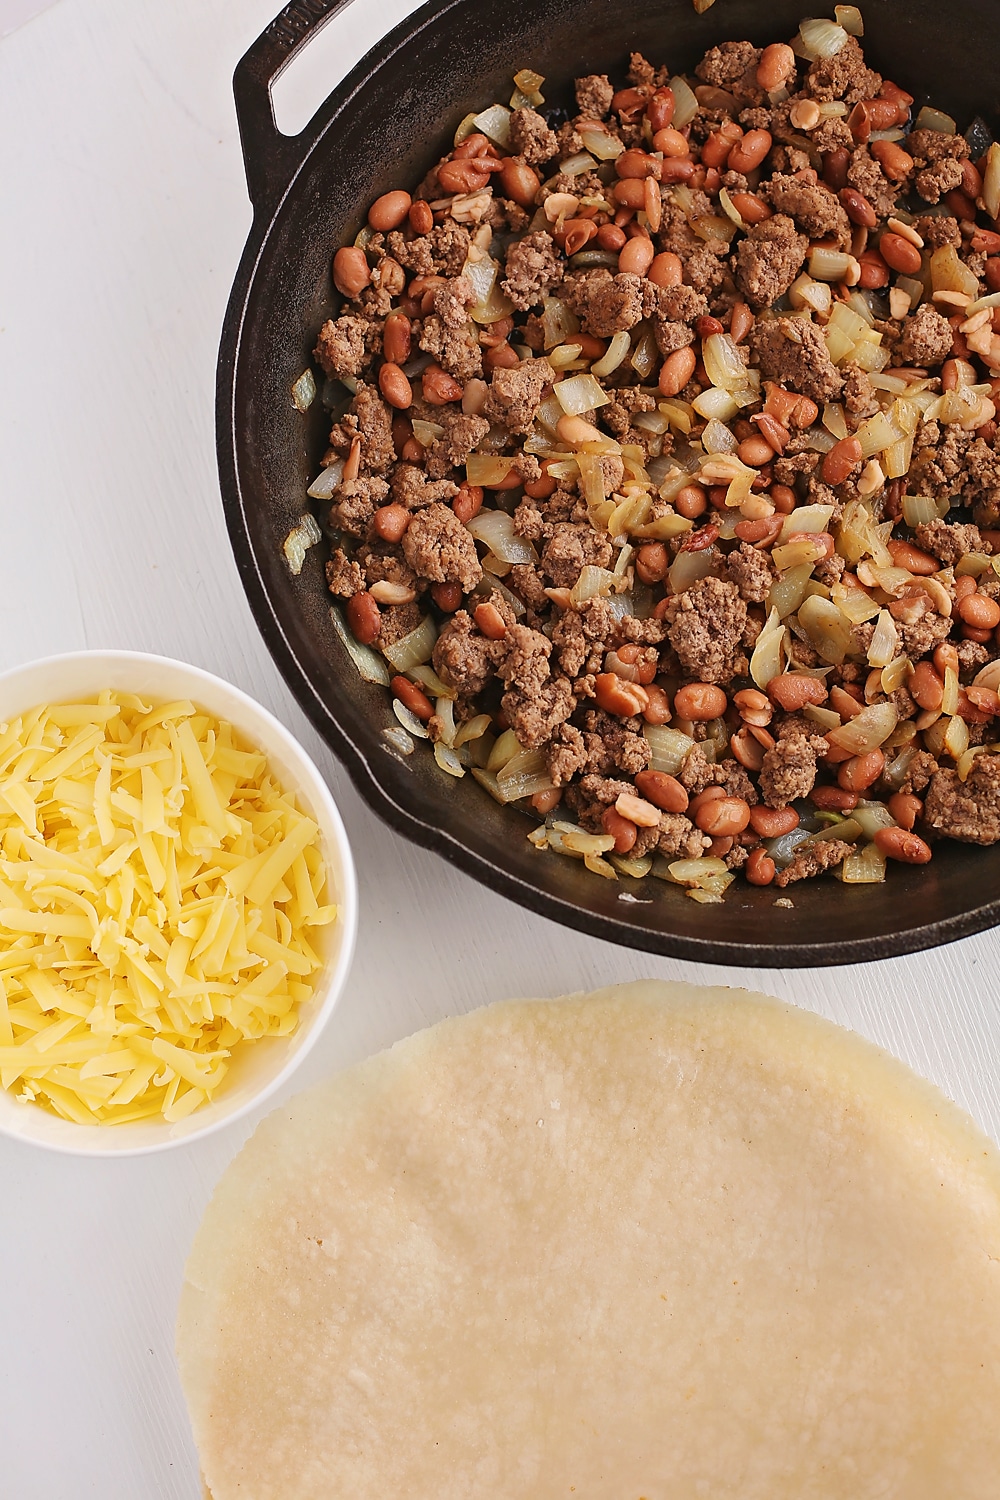 tabletop with skillet with browned meat and tortillas